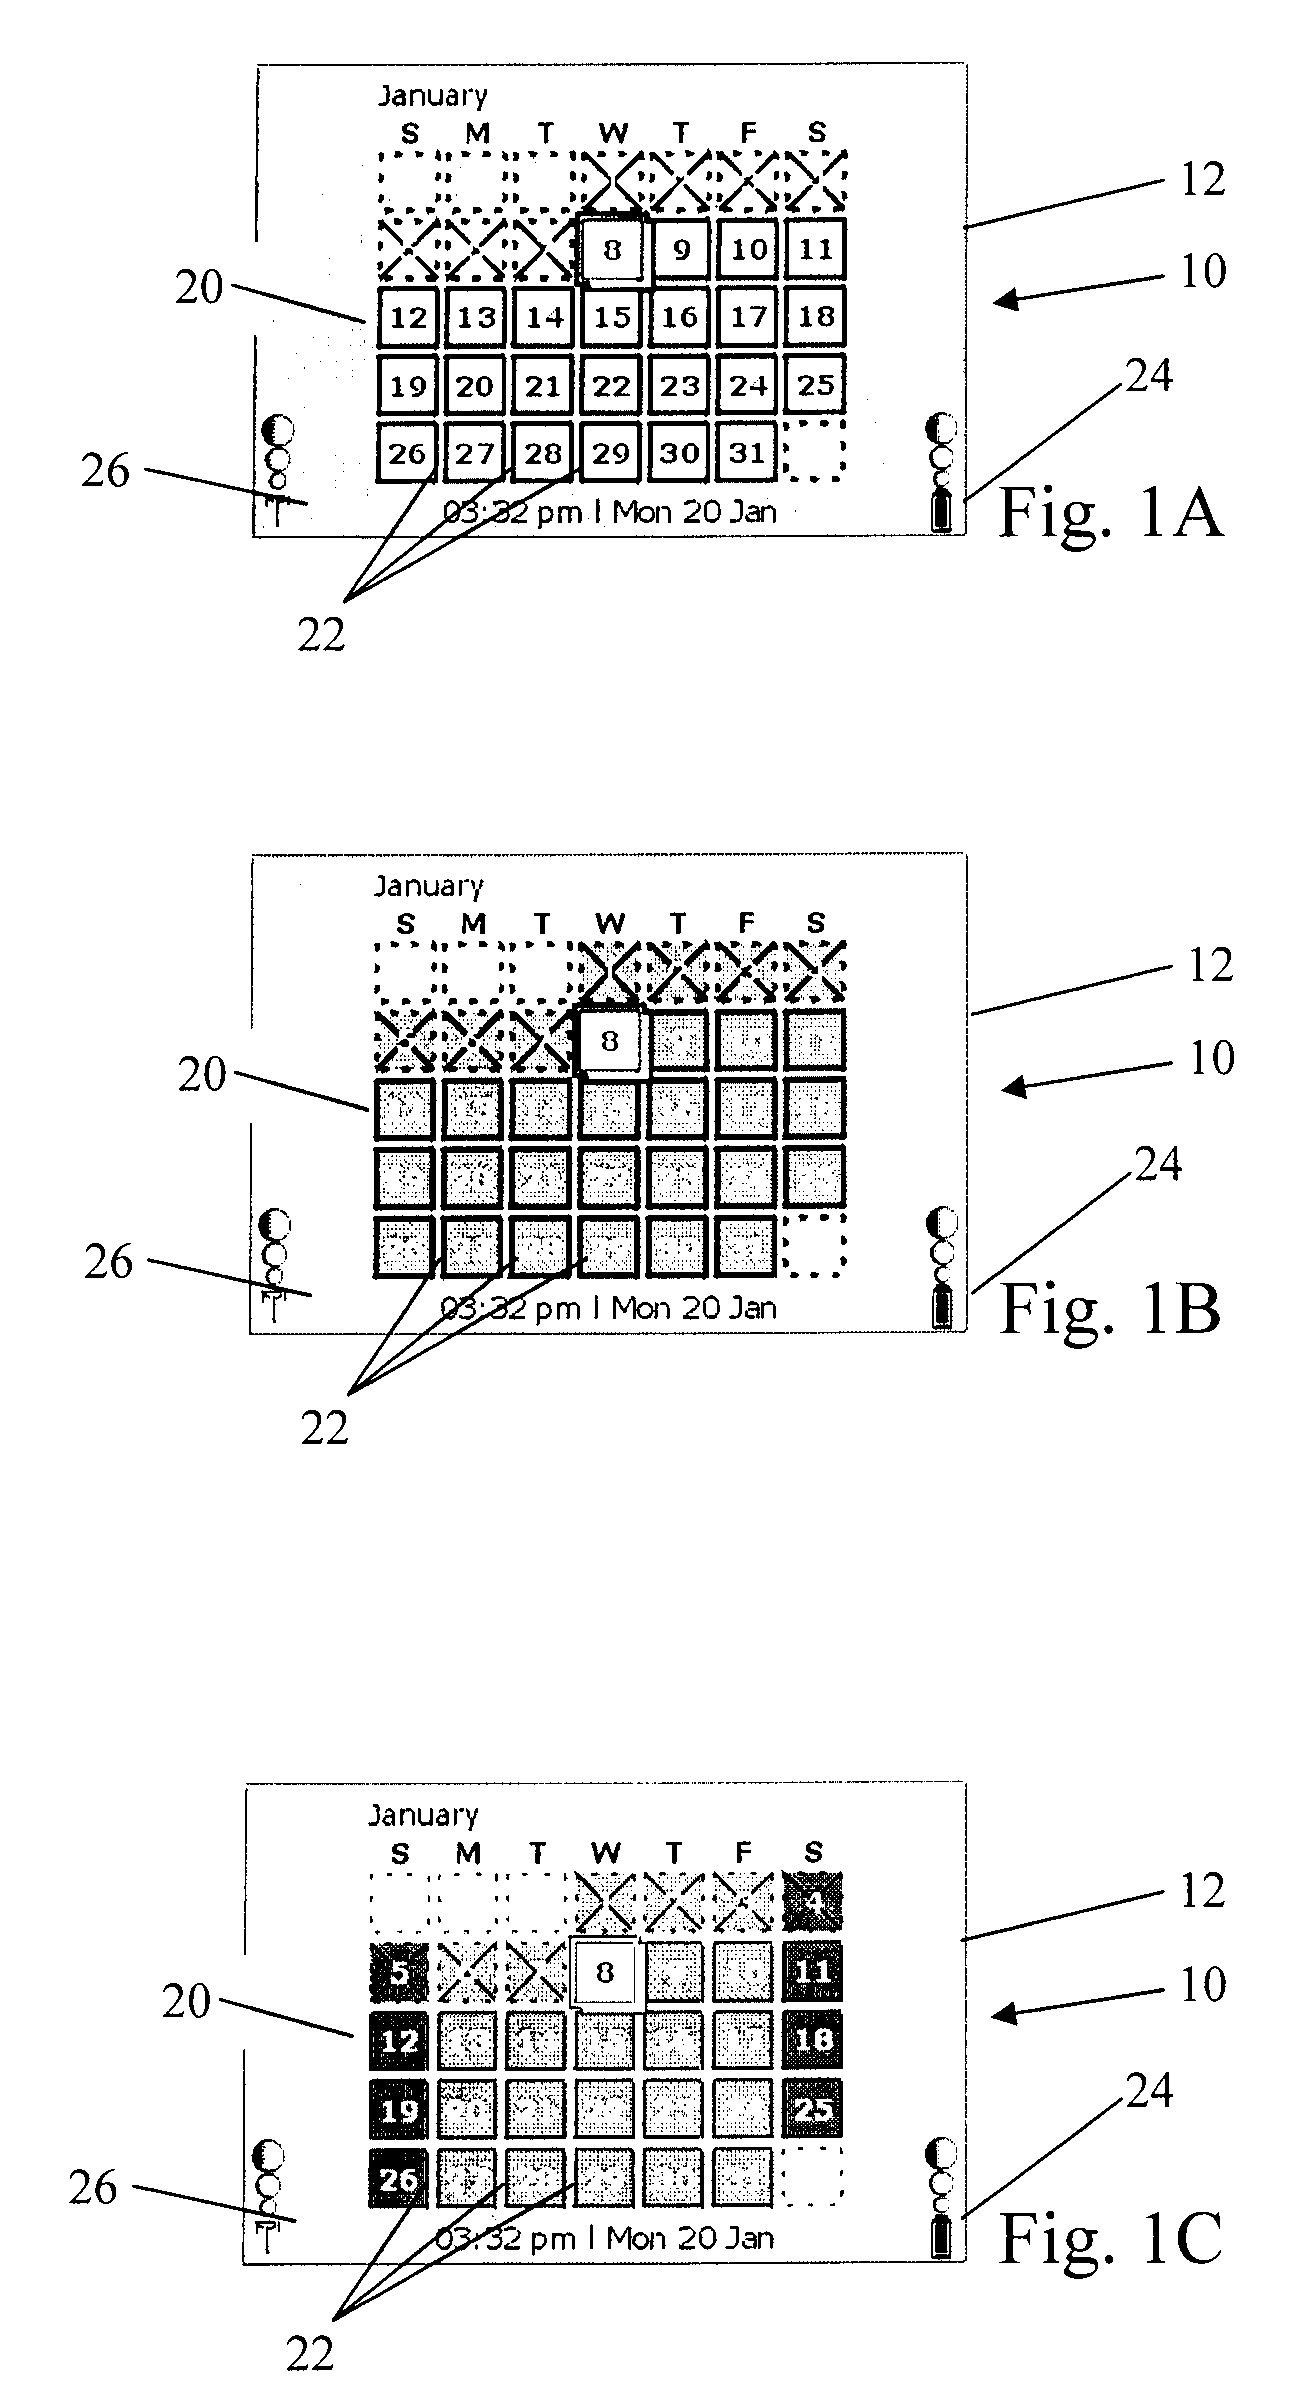 Method and apparatus for dynamically varying one or more properties of a display element in response to variation in an associated characteristic